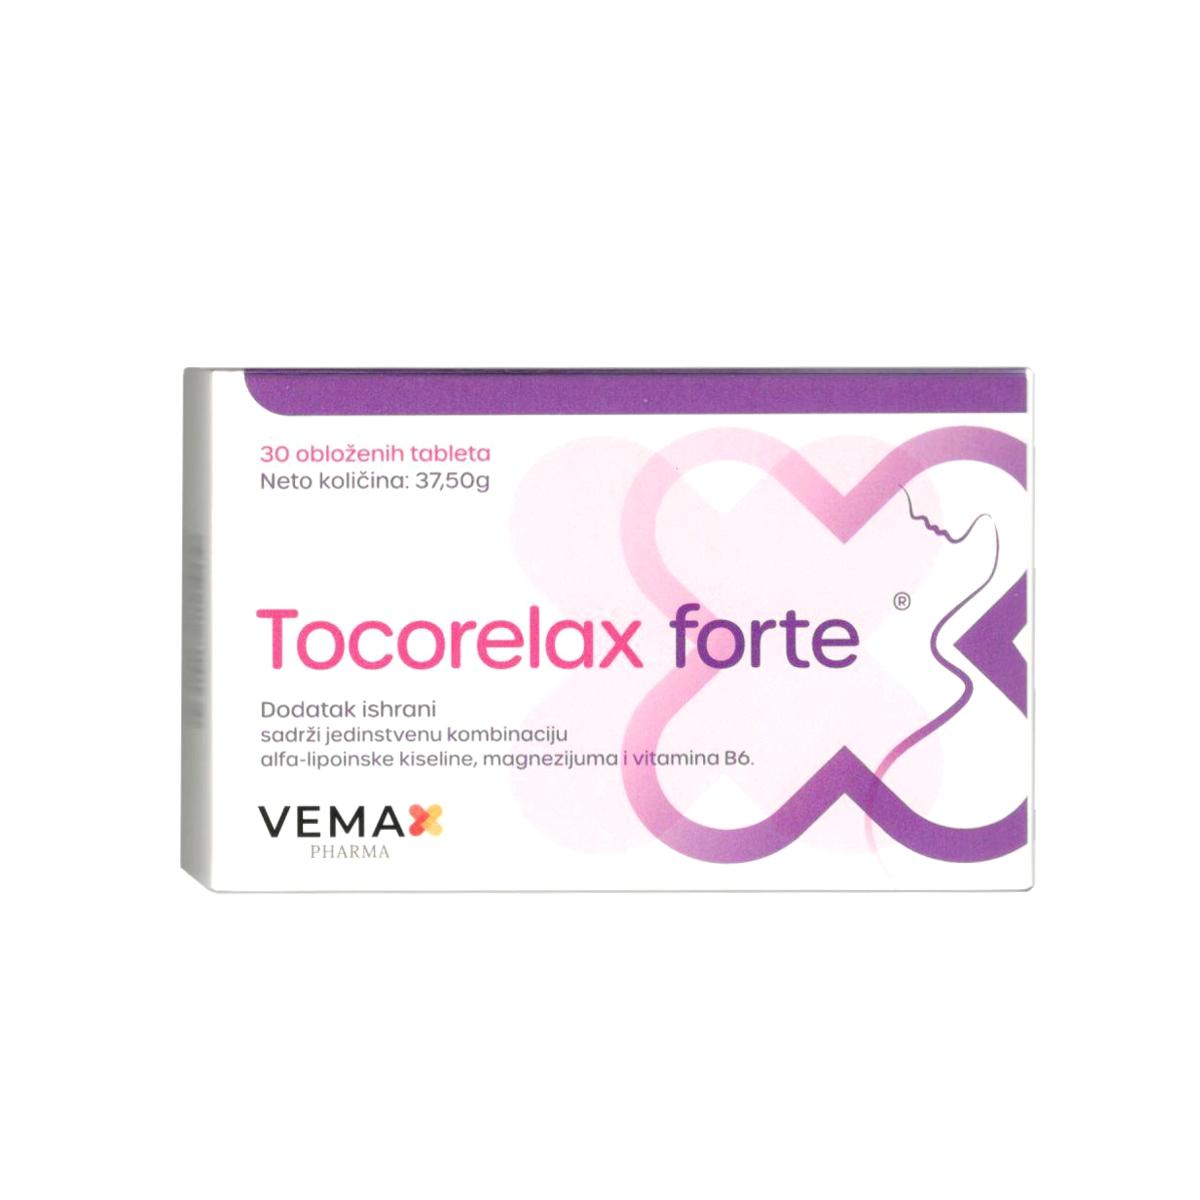 Selected image for Tocorelax forte tablete 30/1